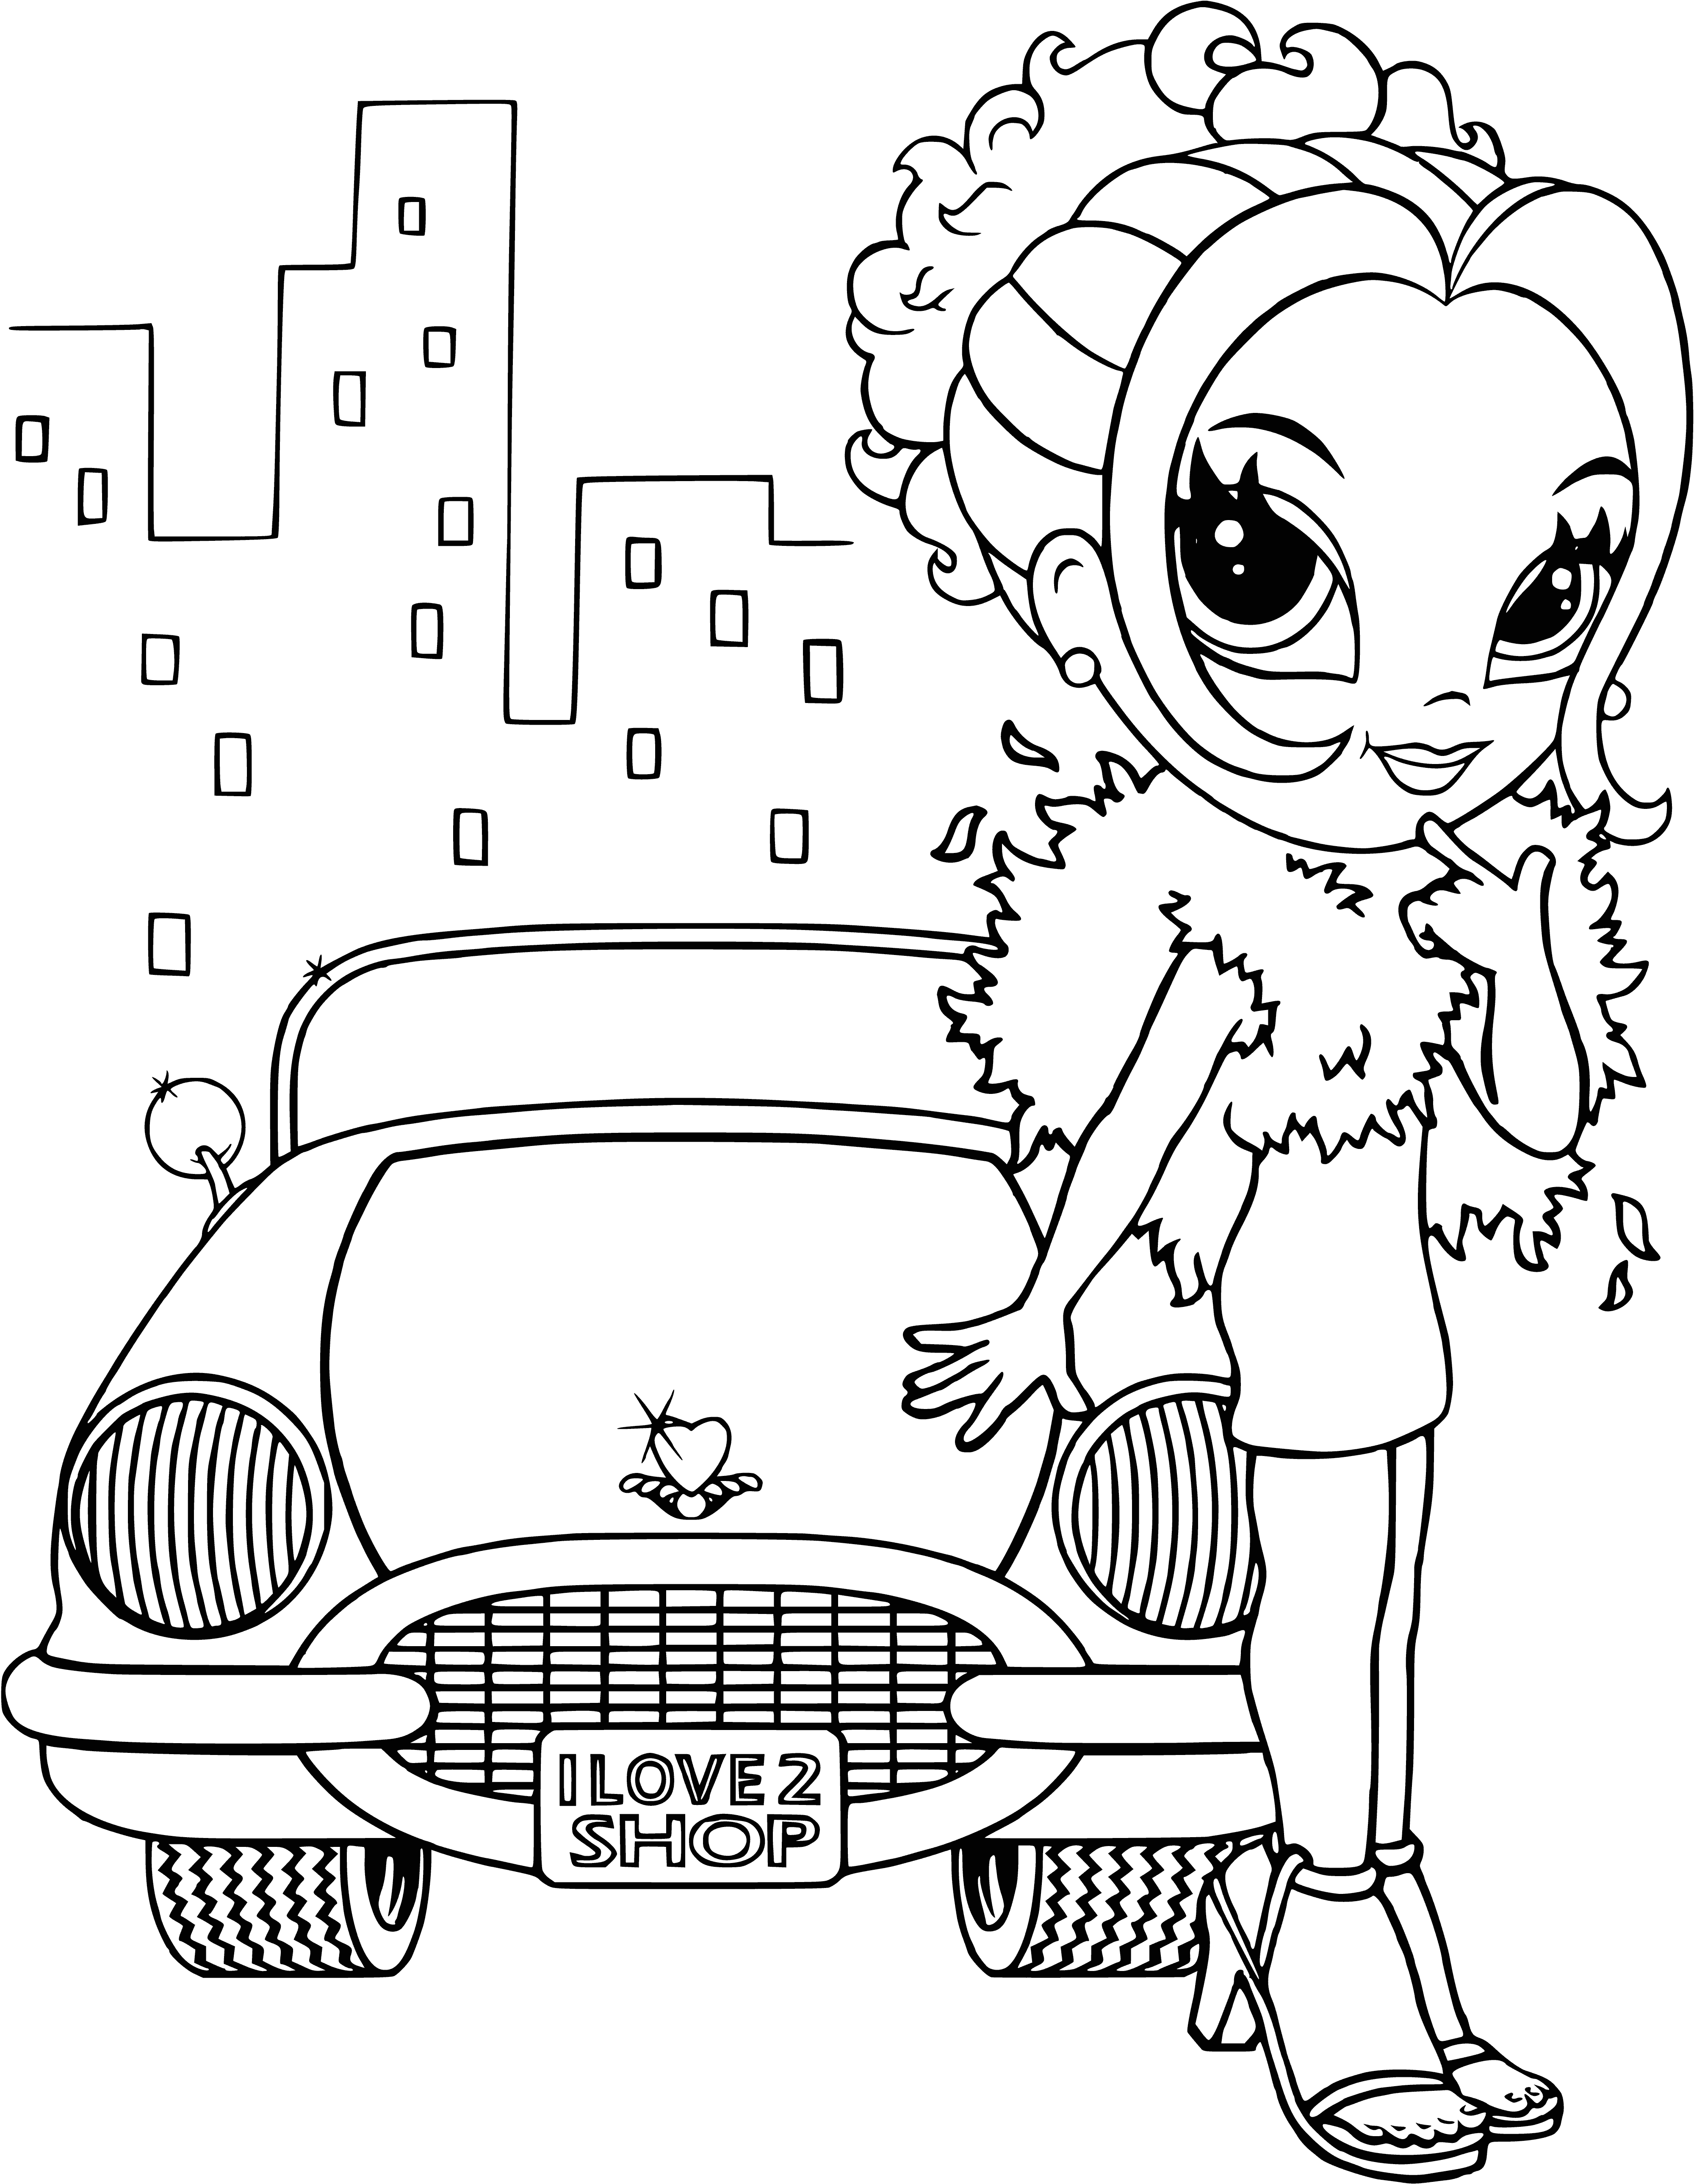 coloring page: Girl in pink dress and white fur-trimmed coat with pink heels and purse, with a white scarf around her neck. An enchanting Lisa Frank Glamour Girl! #coloringpage